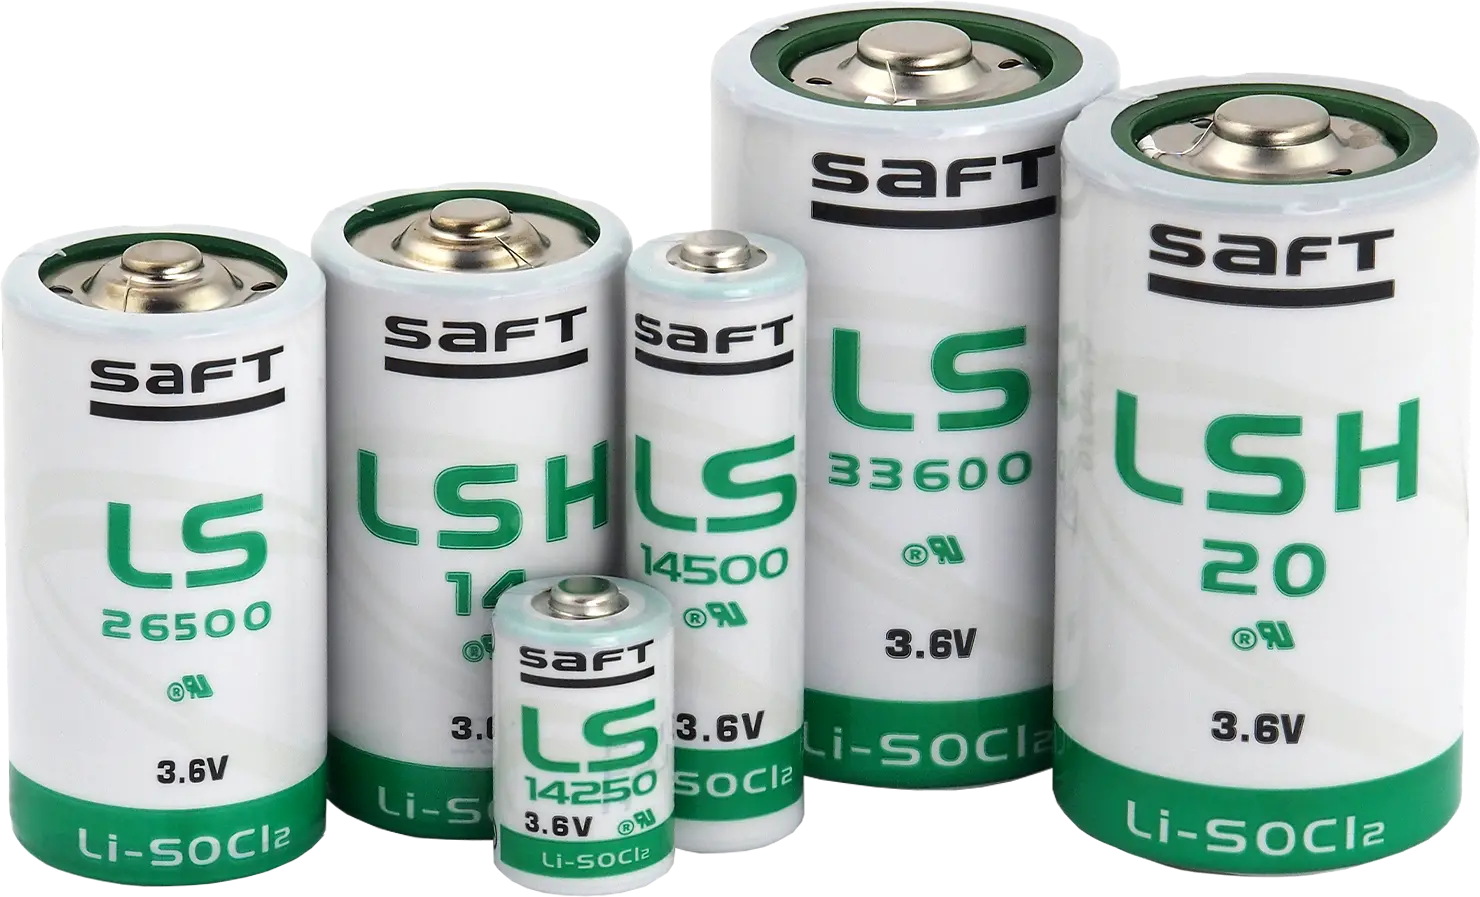 Saft LISOCL2 Battery Collection